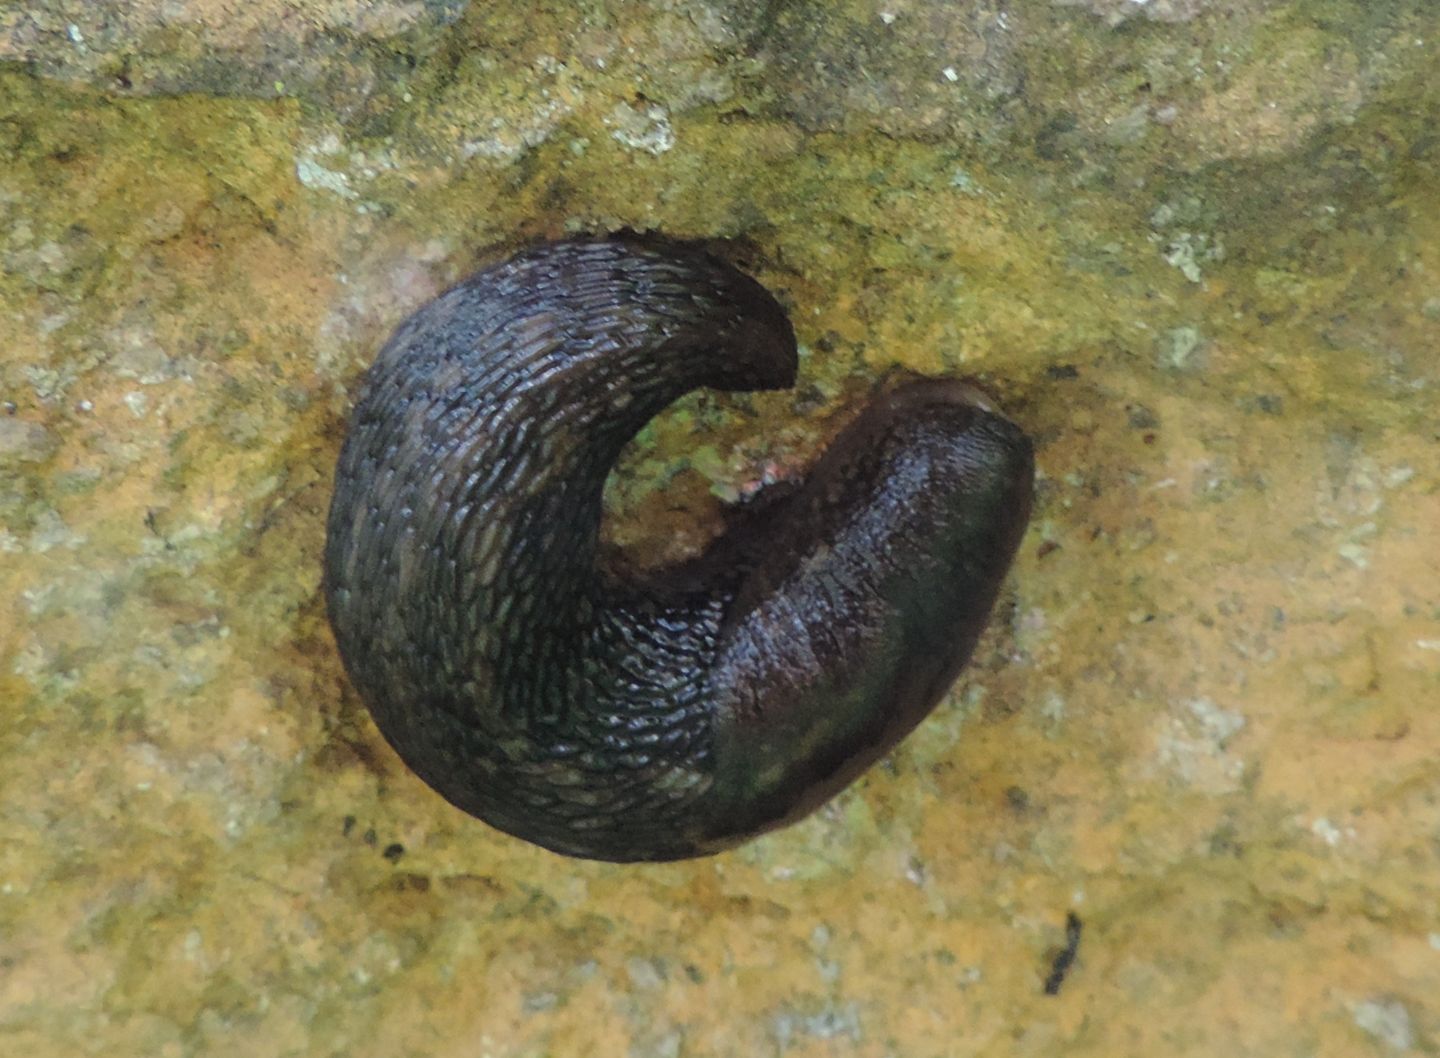 Limax scuro?